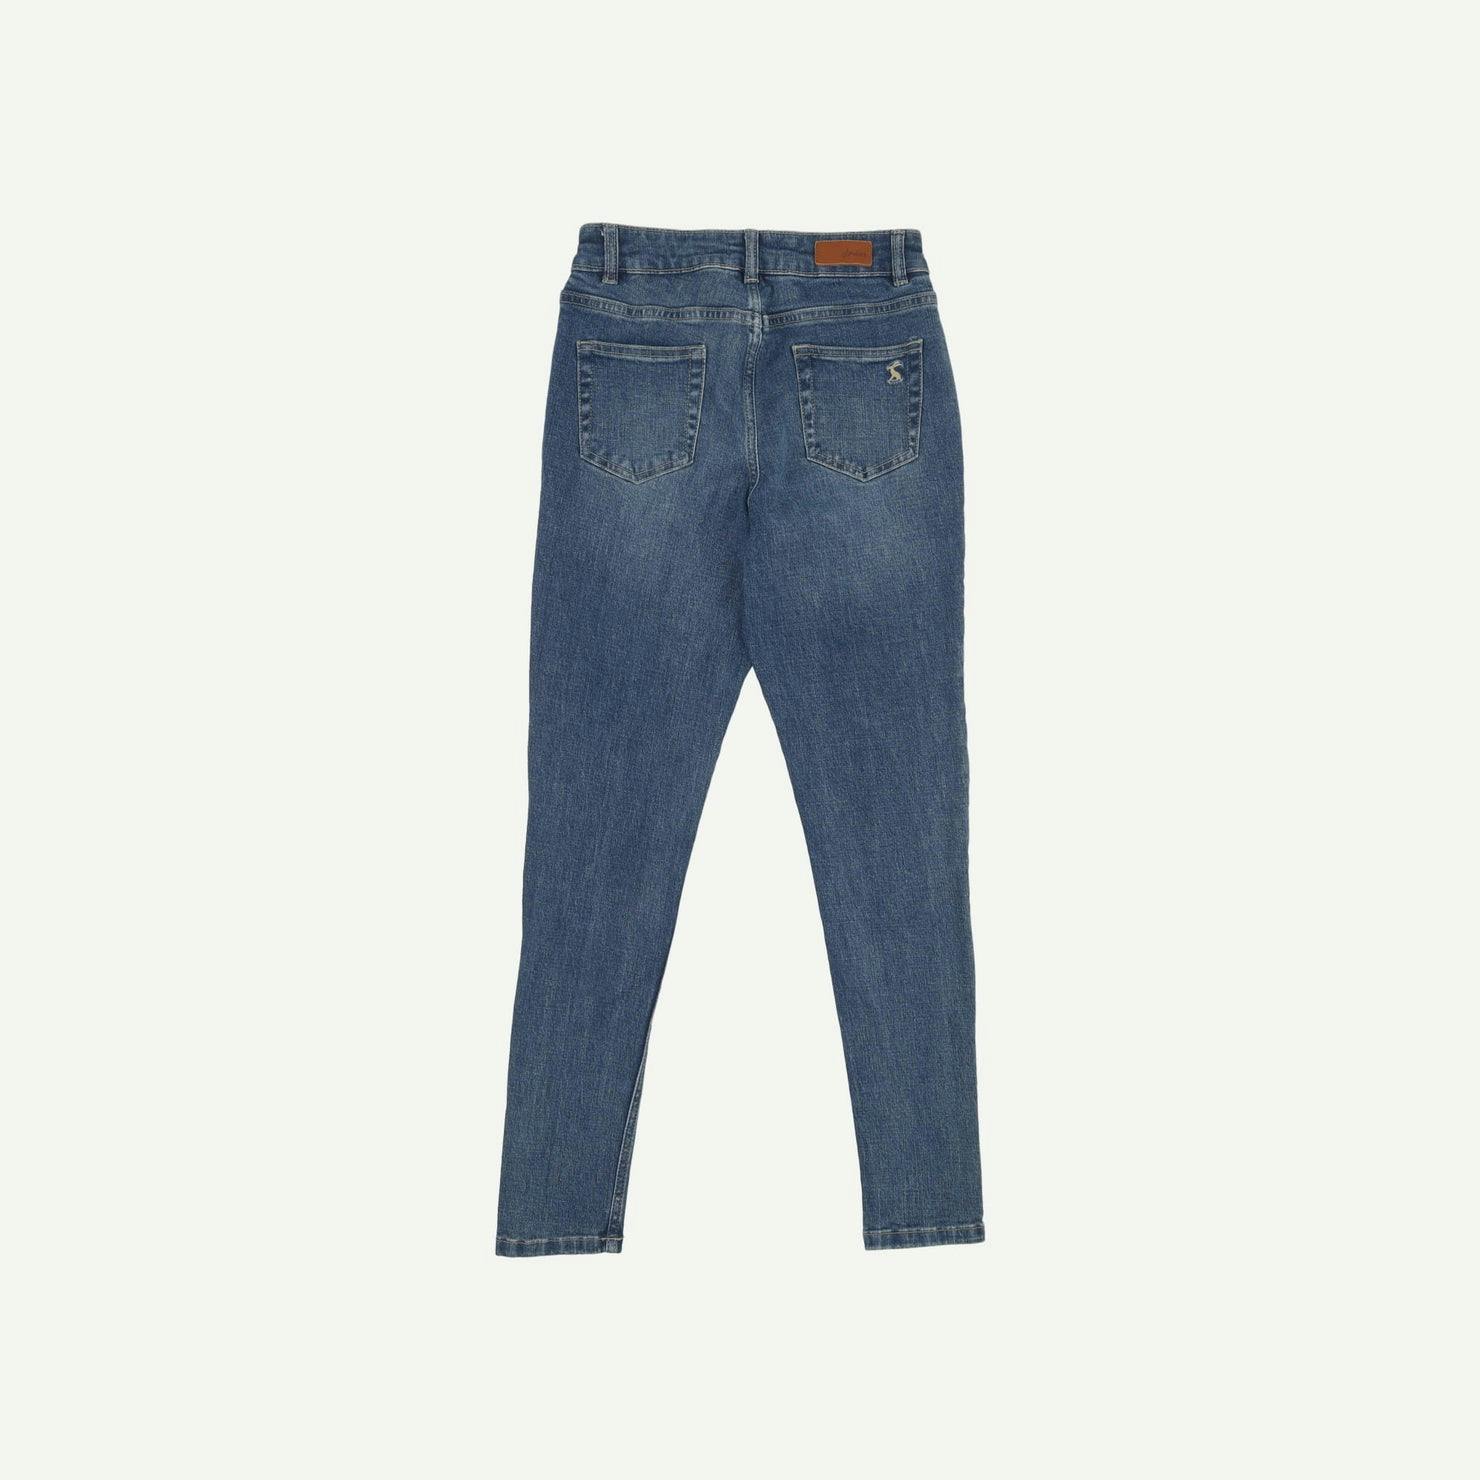 Joules Pre-loved Blue Jeans